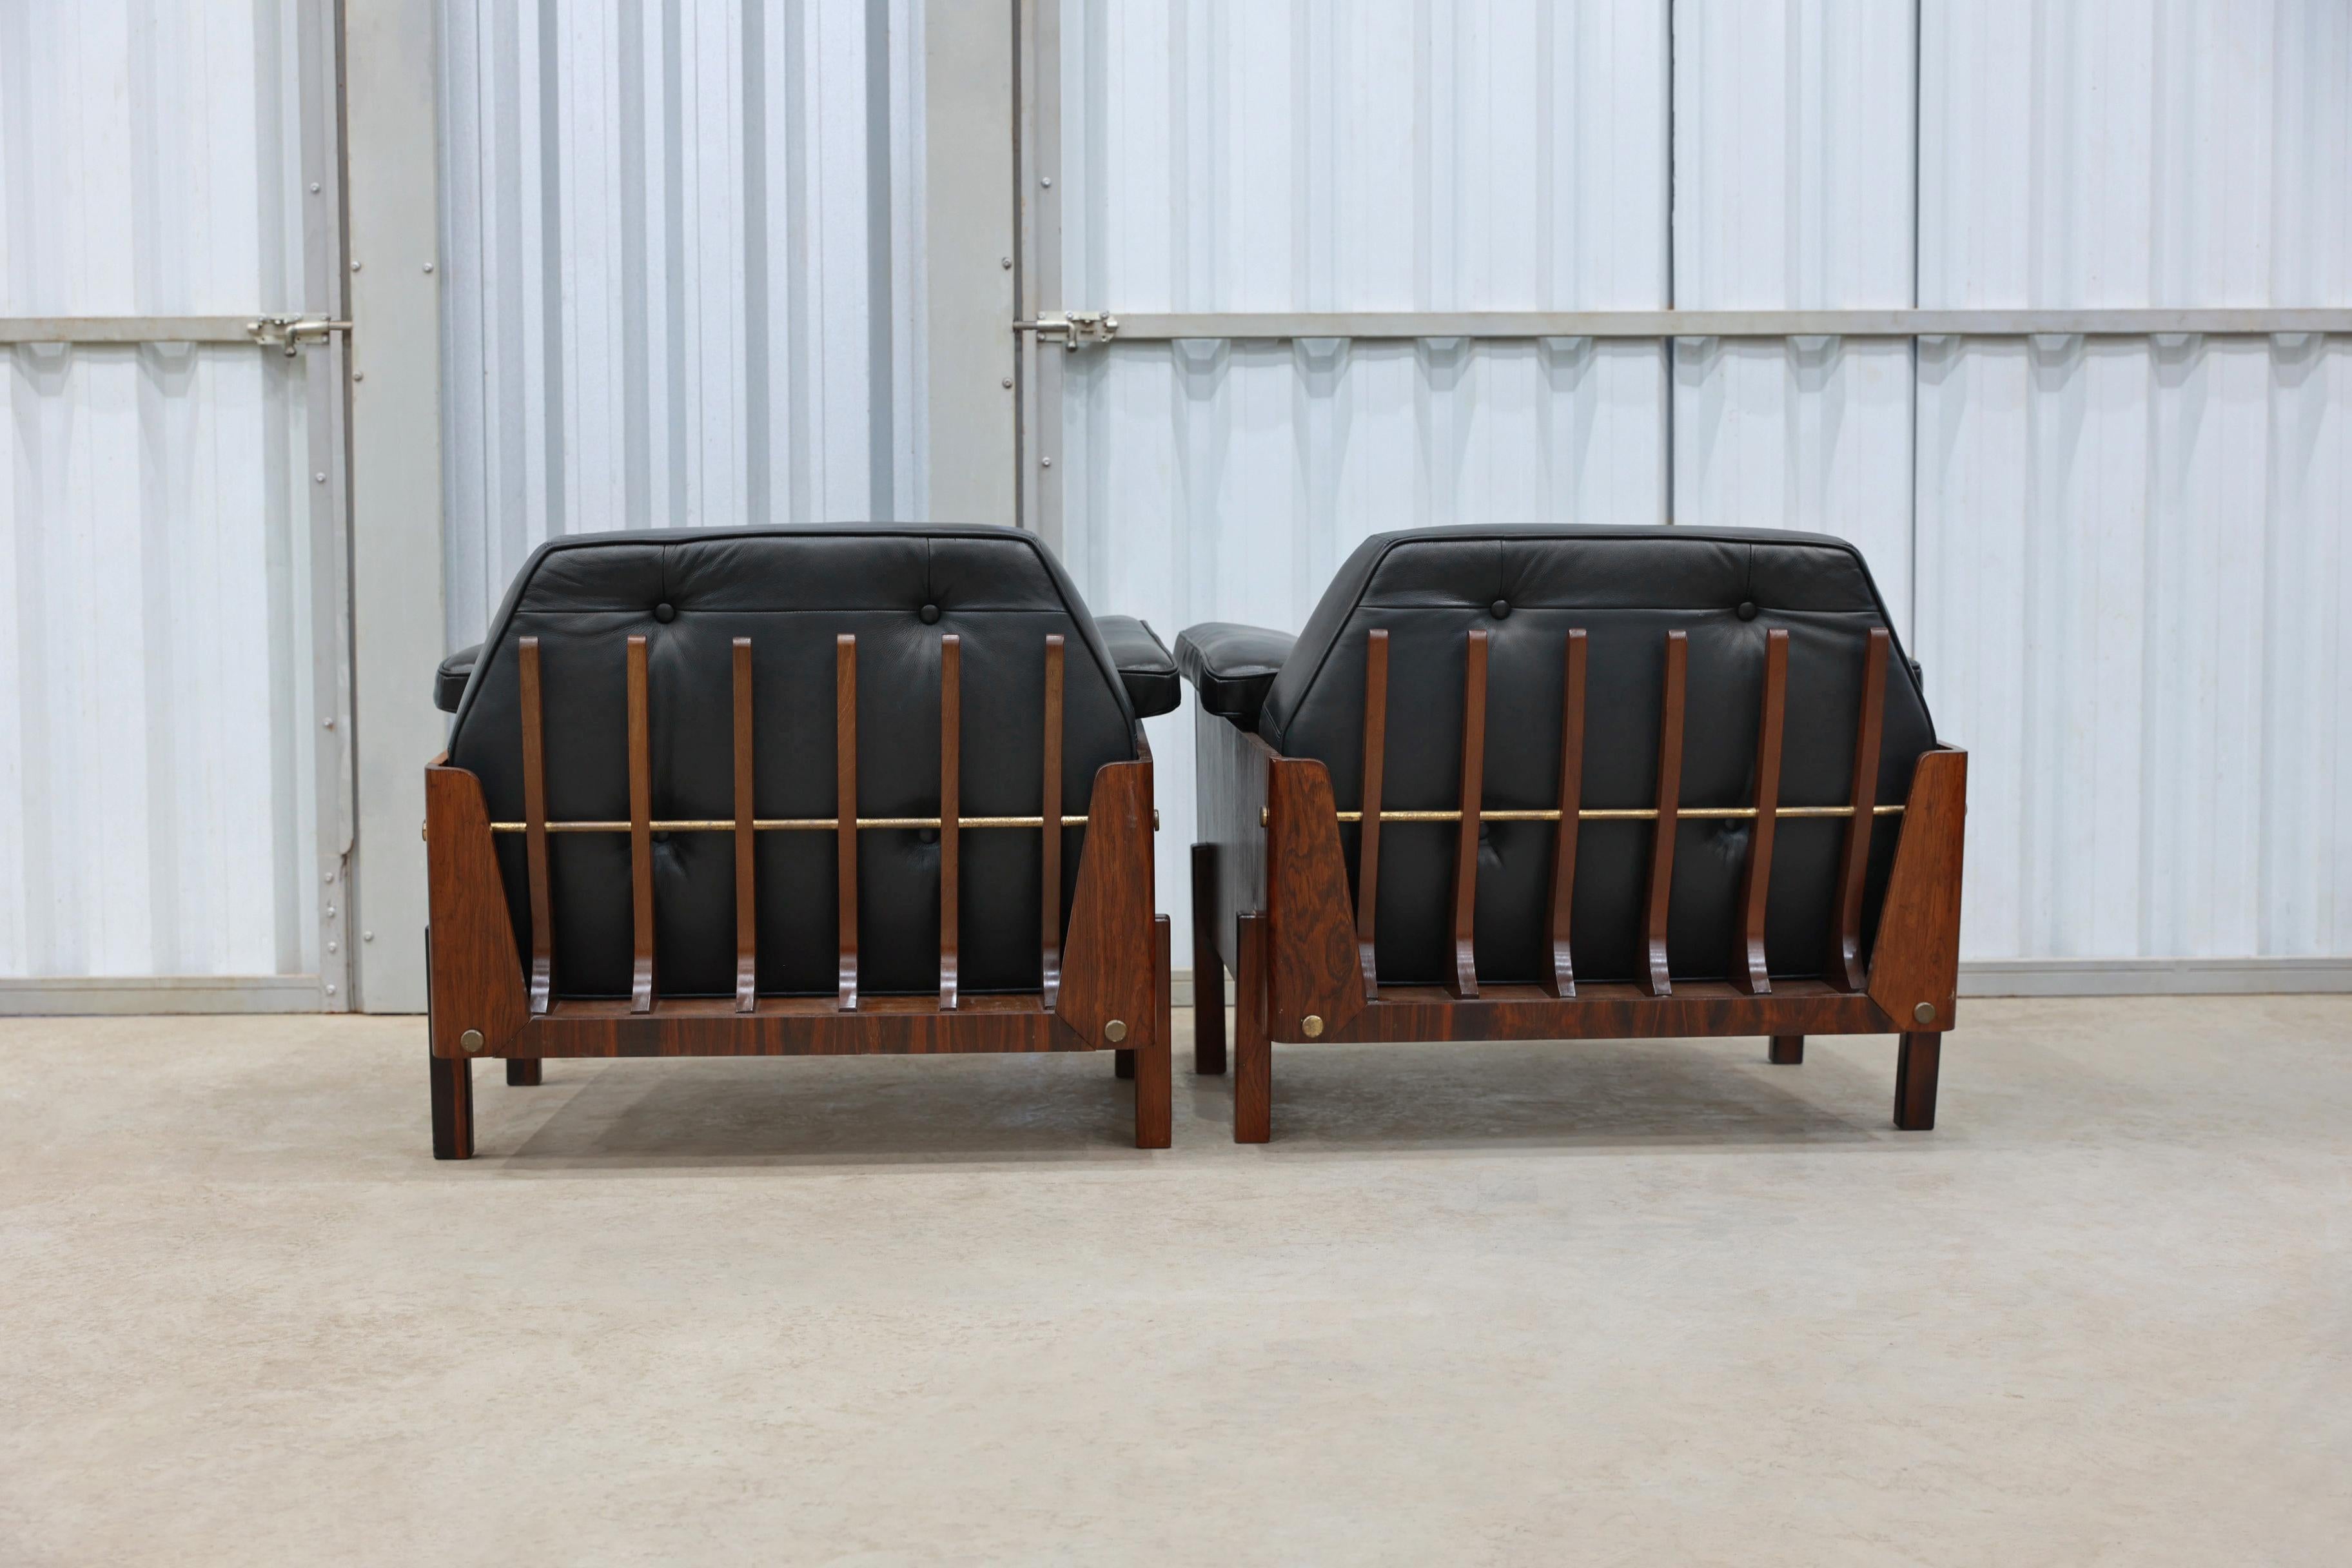 20th Century Mid-Century Modern Armchairs in Rosewood & Black Leather by Bertomeu, Brazil